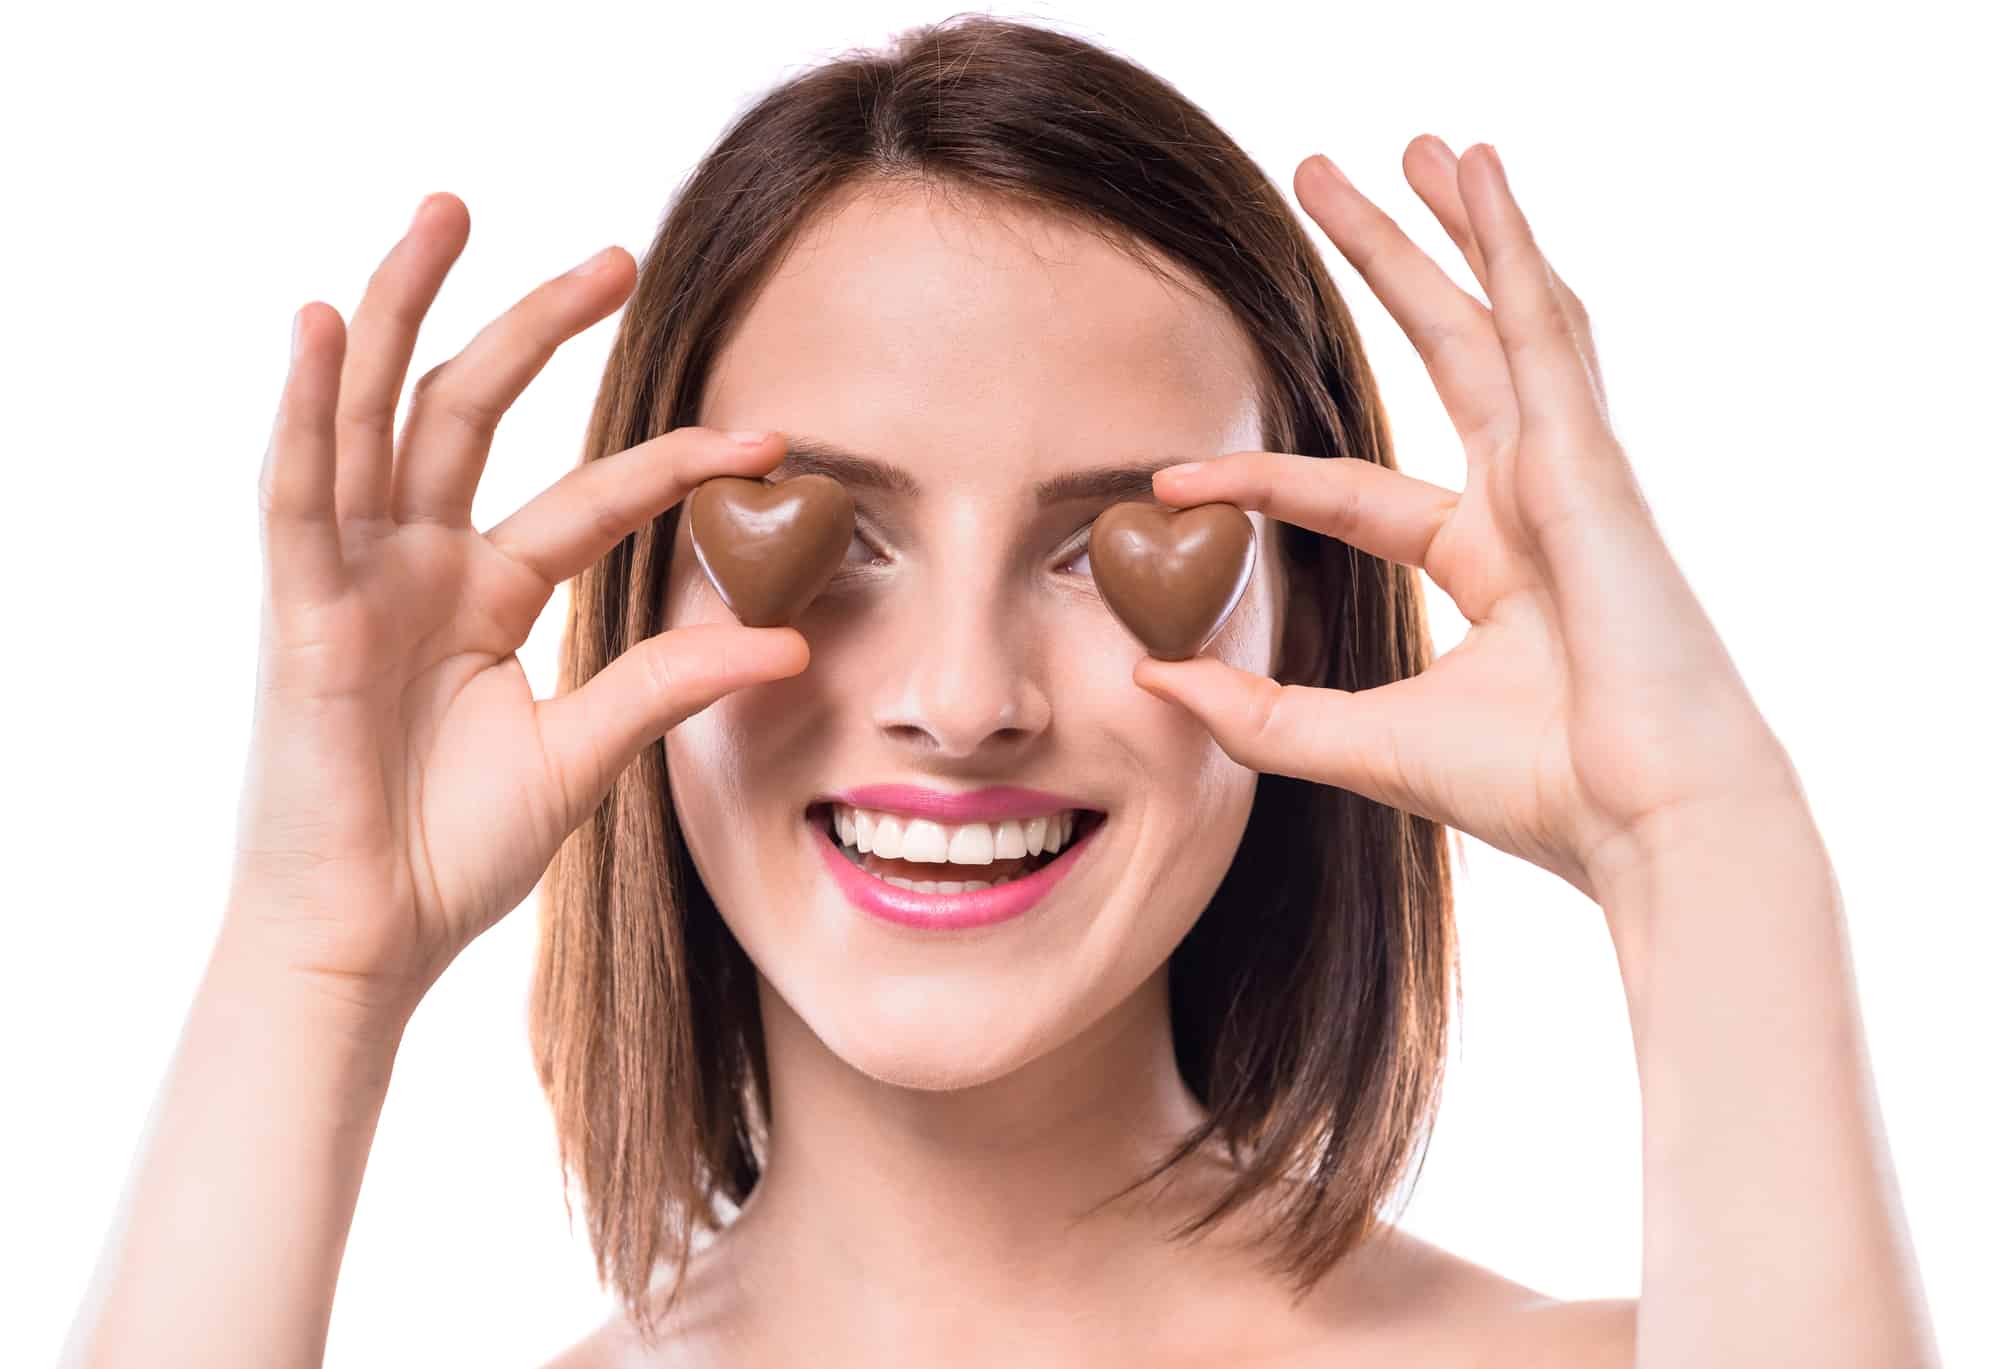 Sweet temptation. Beautiful woman holding heart-shaped chocolate candies over white background.